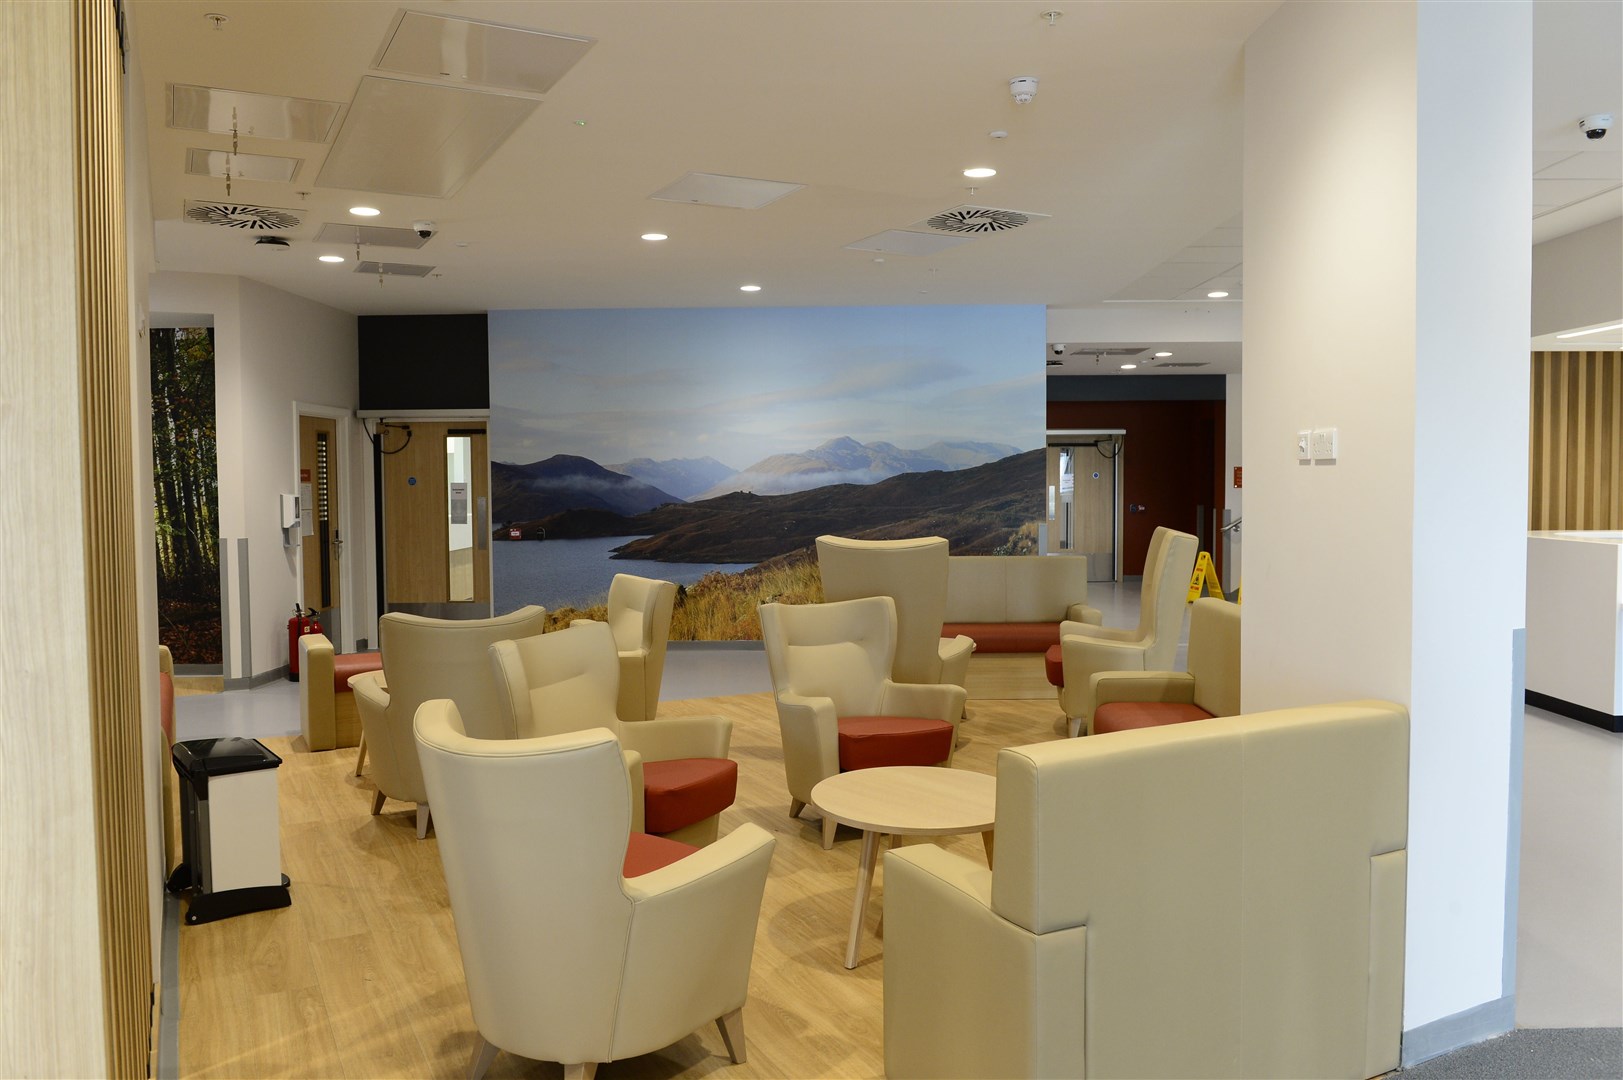 The reception area at the new National Treatment Centre in Inverness.